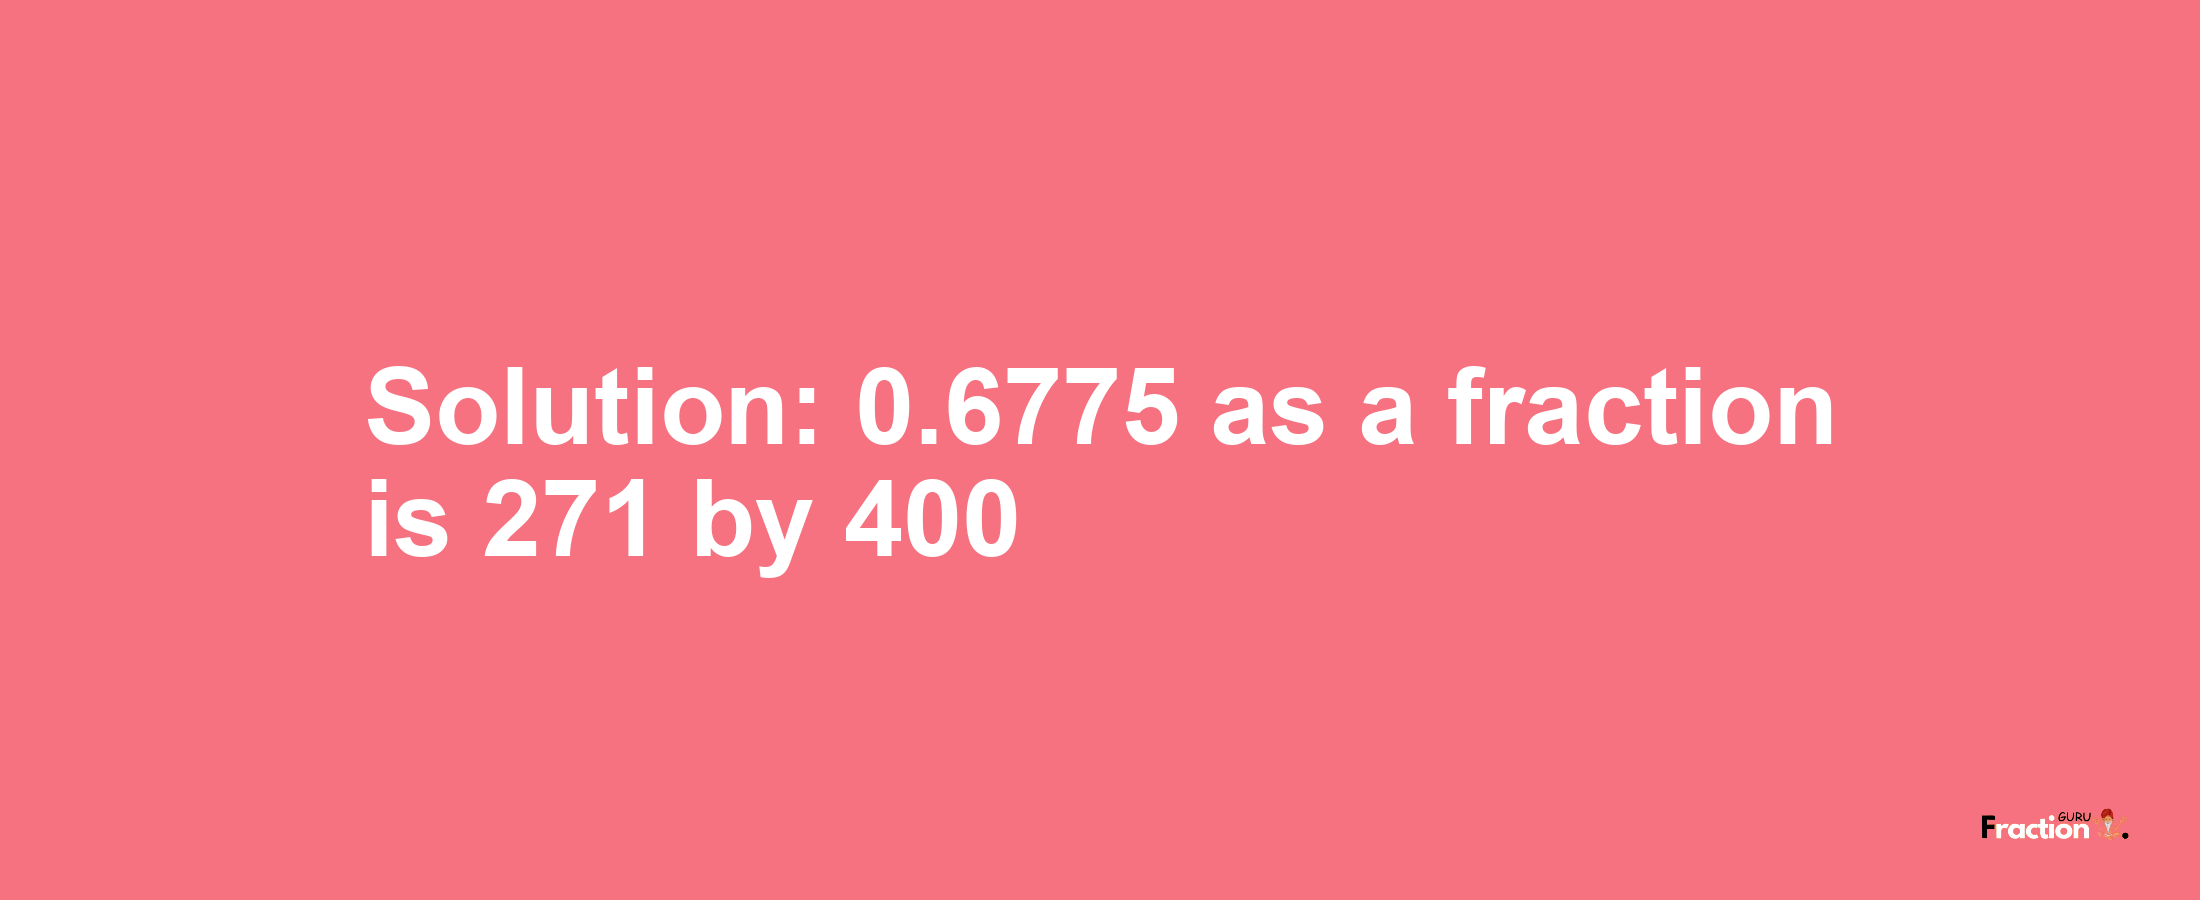 Solution:0.6775 as a fraction is 271/400